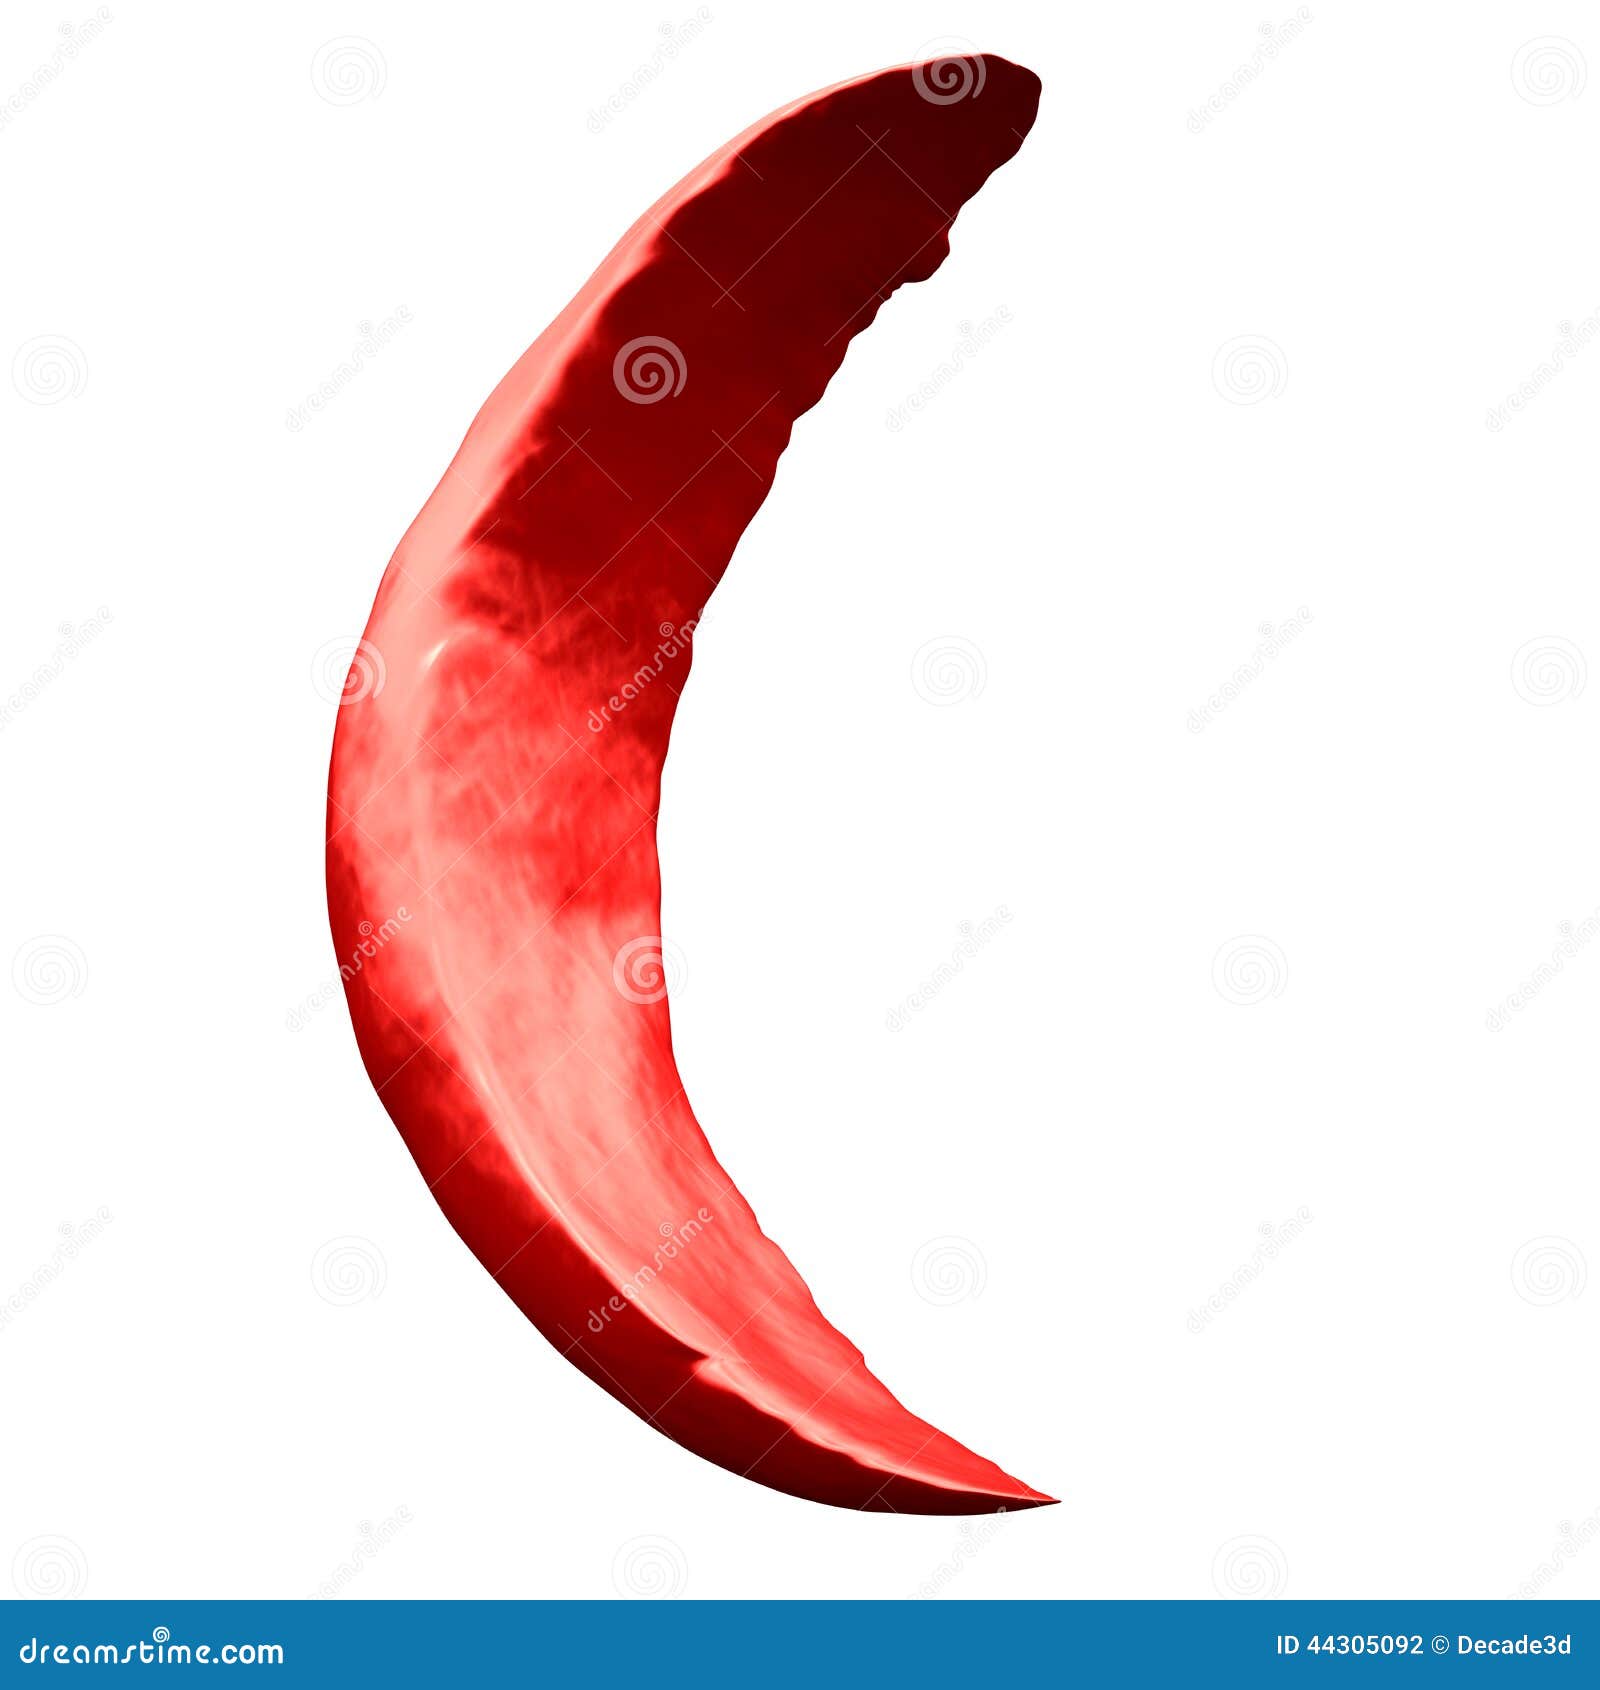 sickle red blood cell